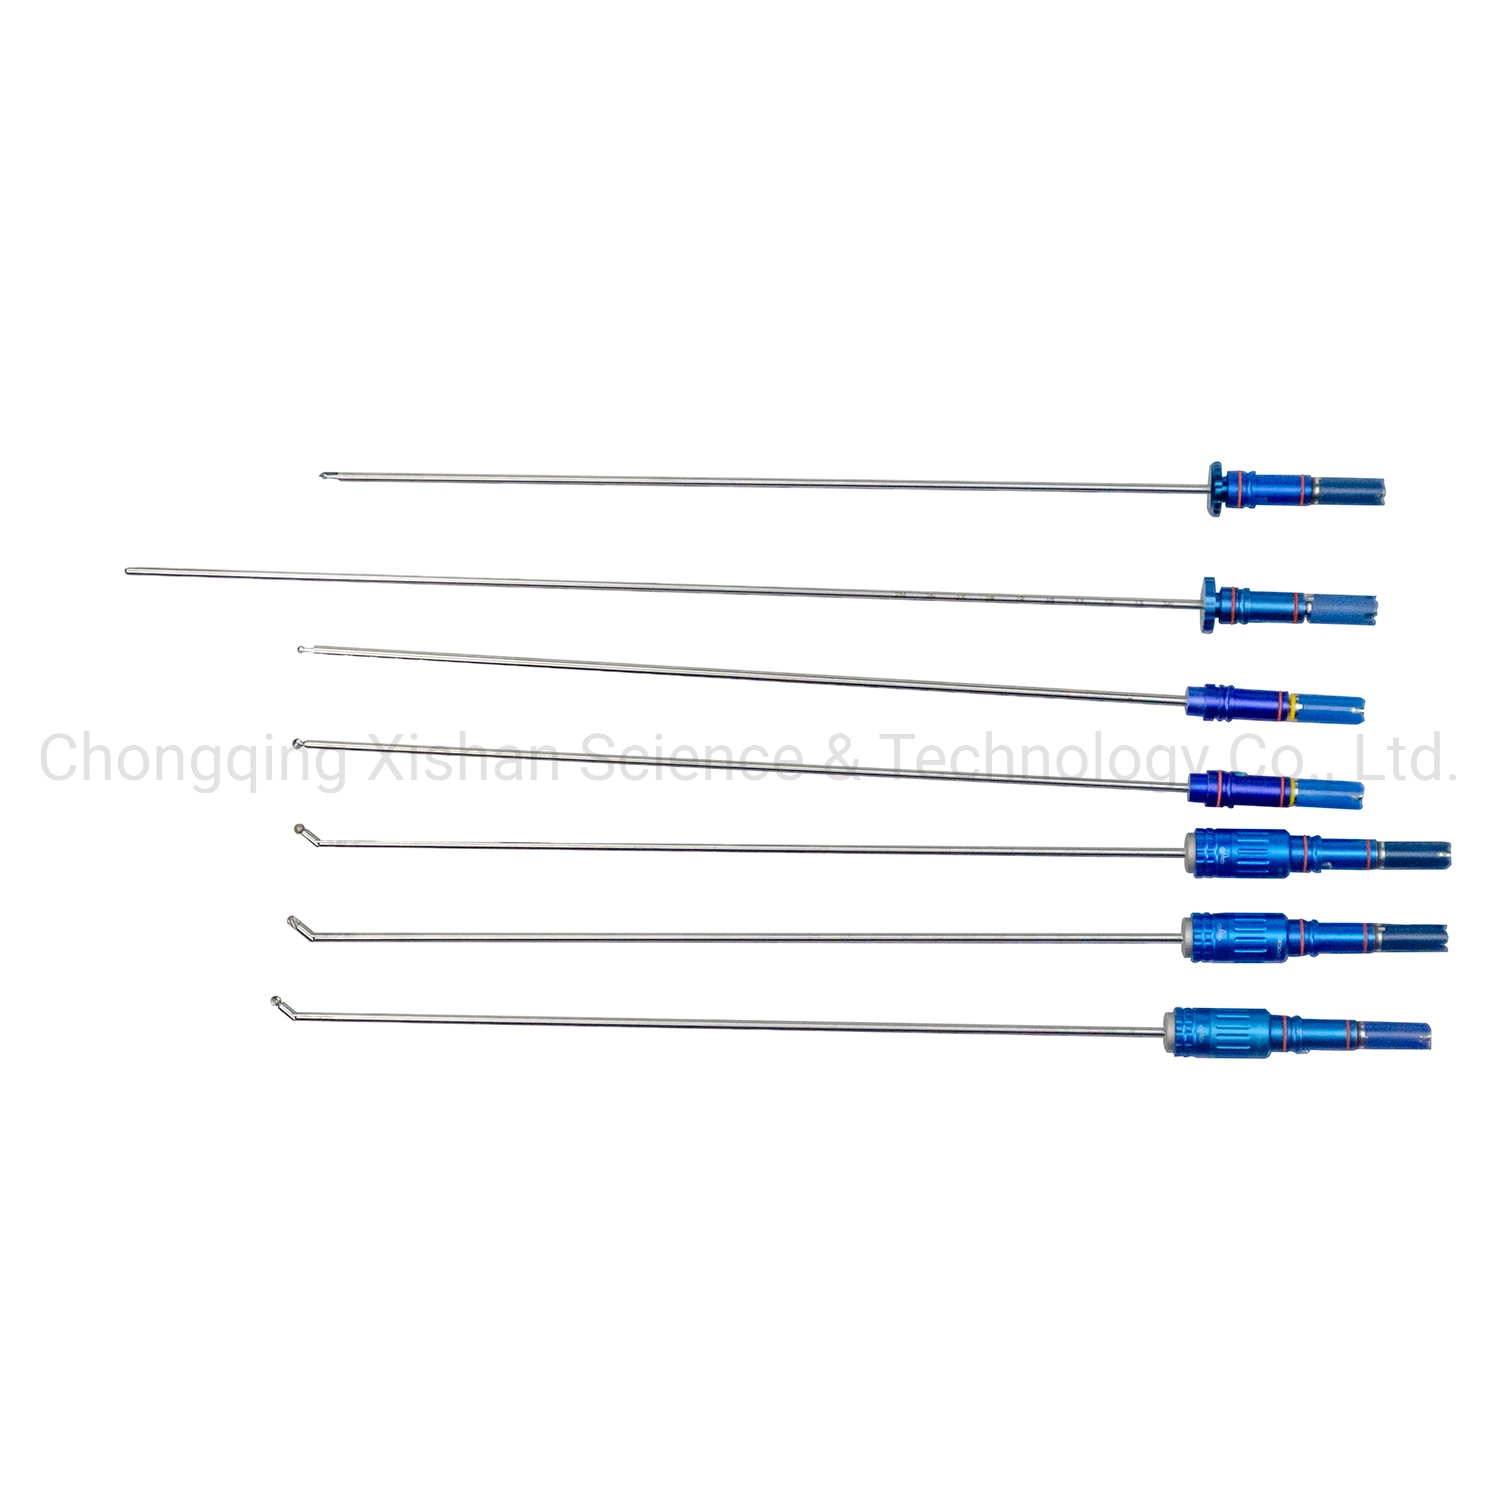 Endoscopic Spine Drill/Surgical Drill for Spinal Surgery/Lateral Bur for Spine Surgery